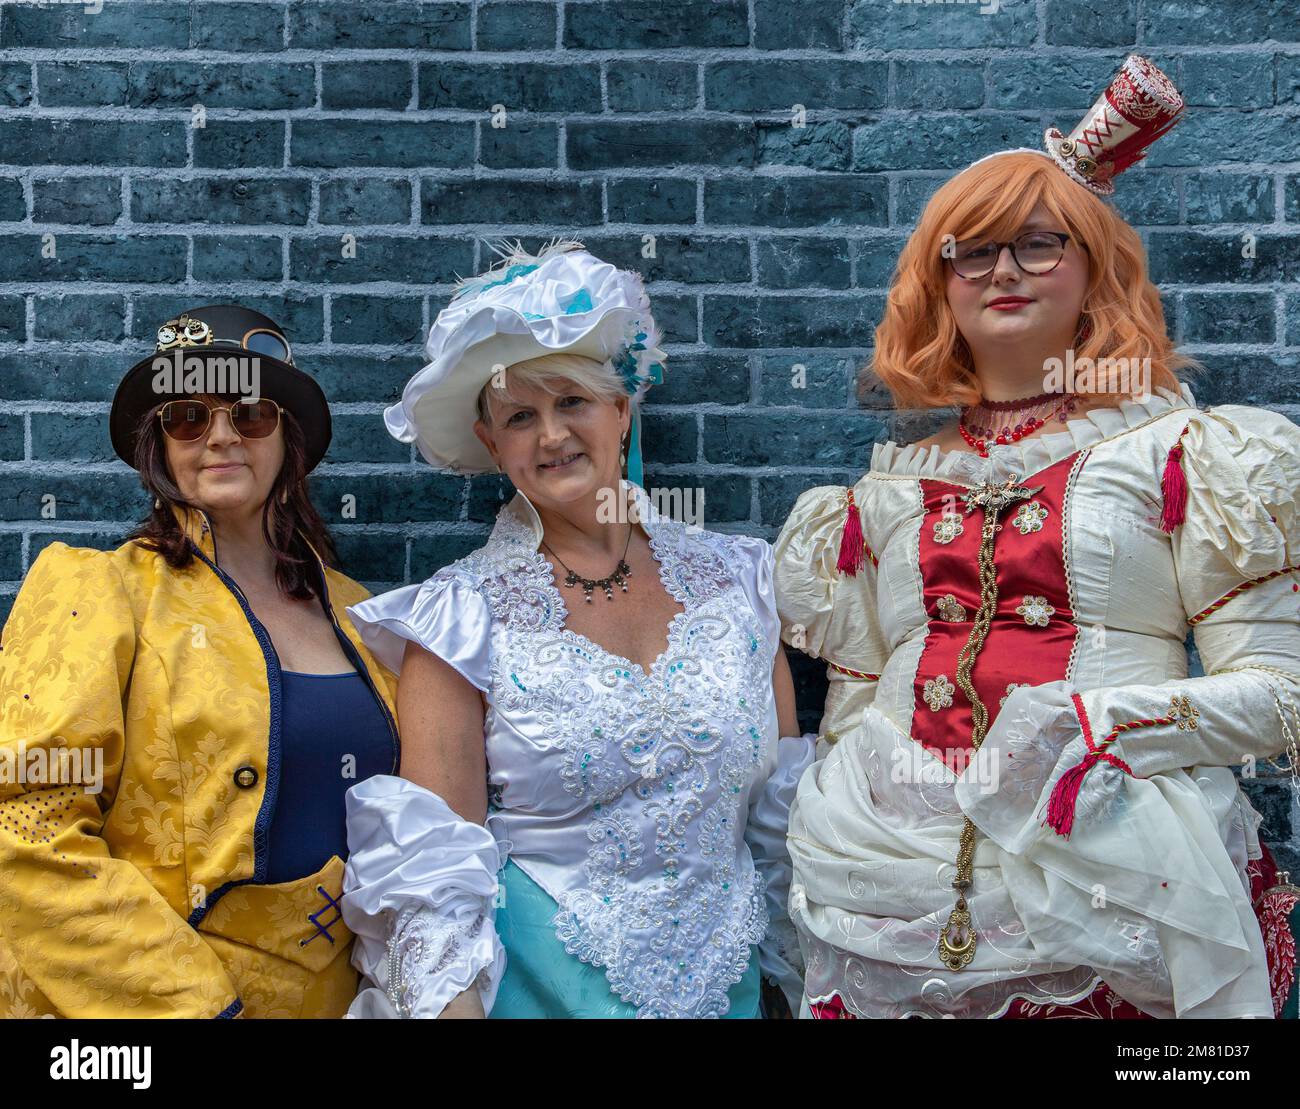 Portrait of three women, female steampunks, smiling while standing next to a wall. Dressed in period costume, steampunk clothing. Stock Photo